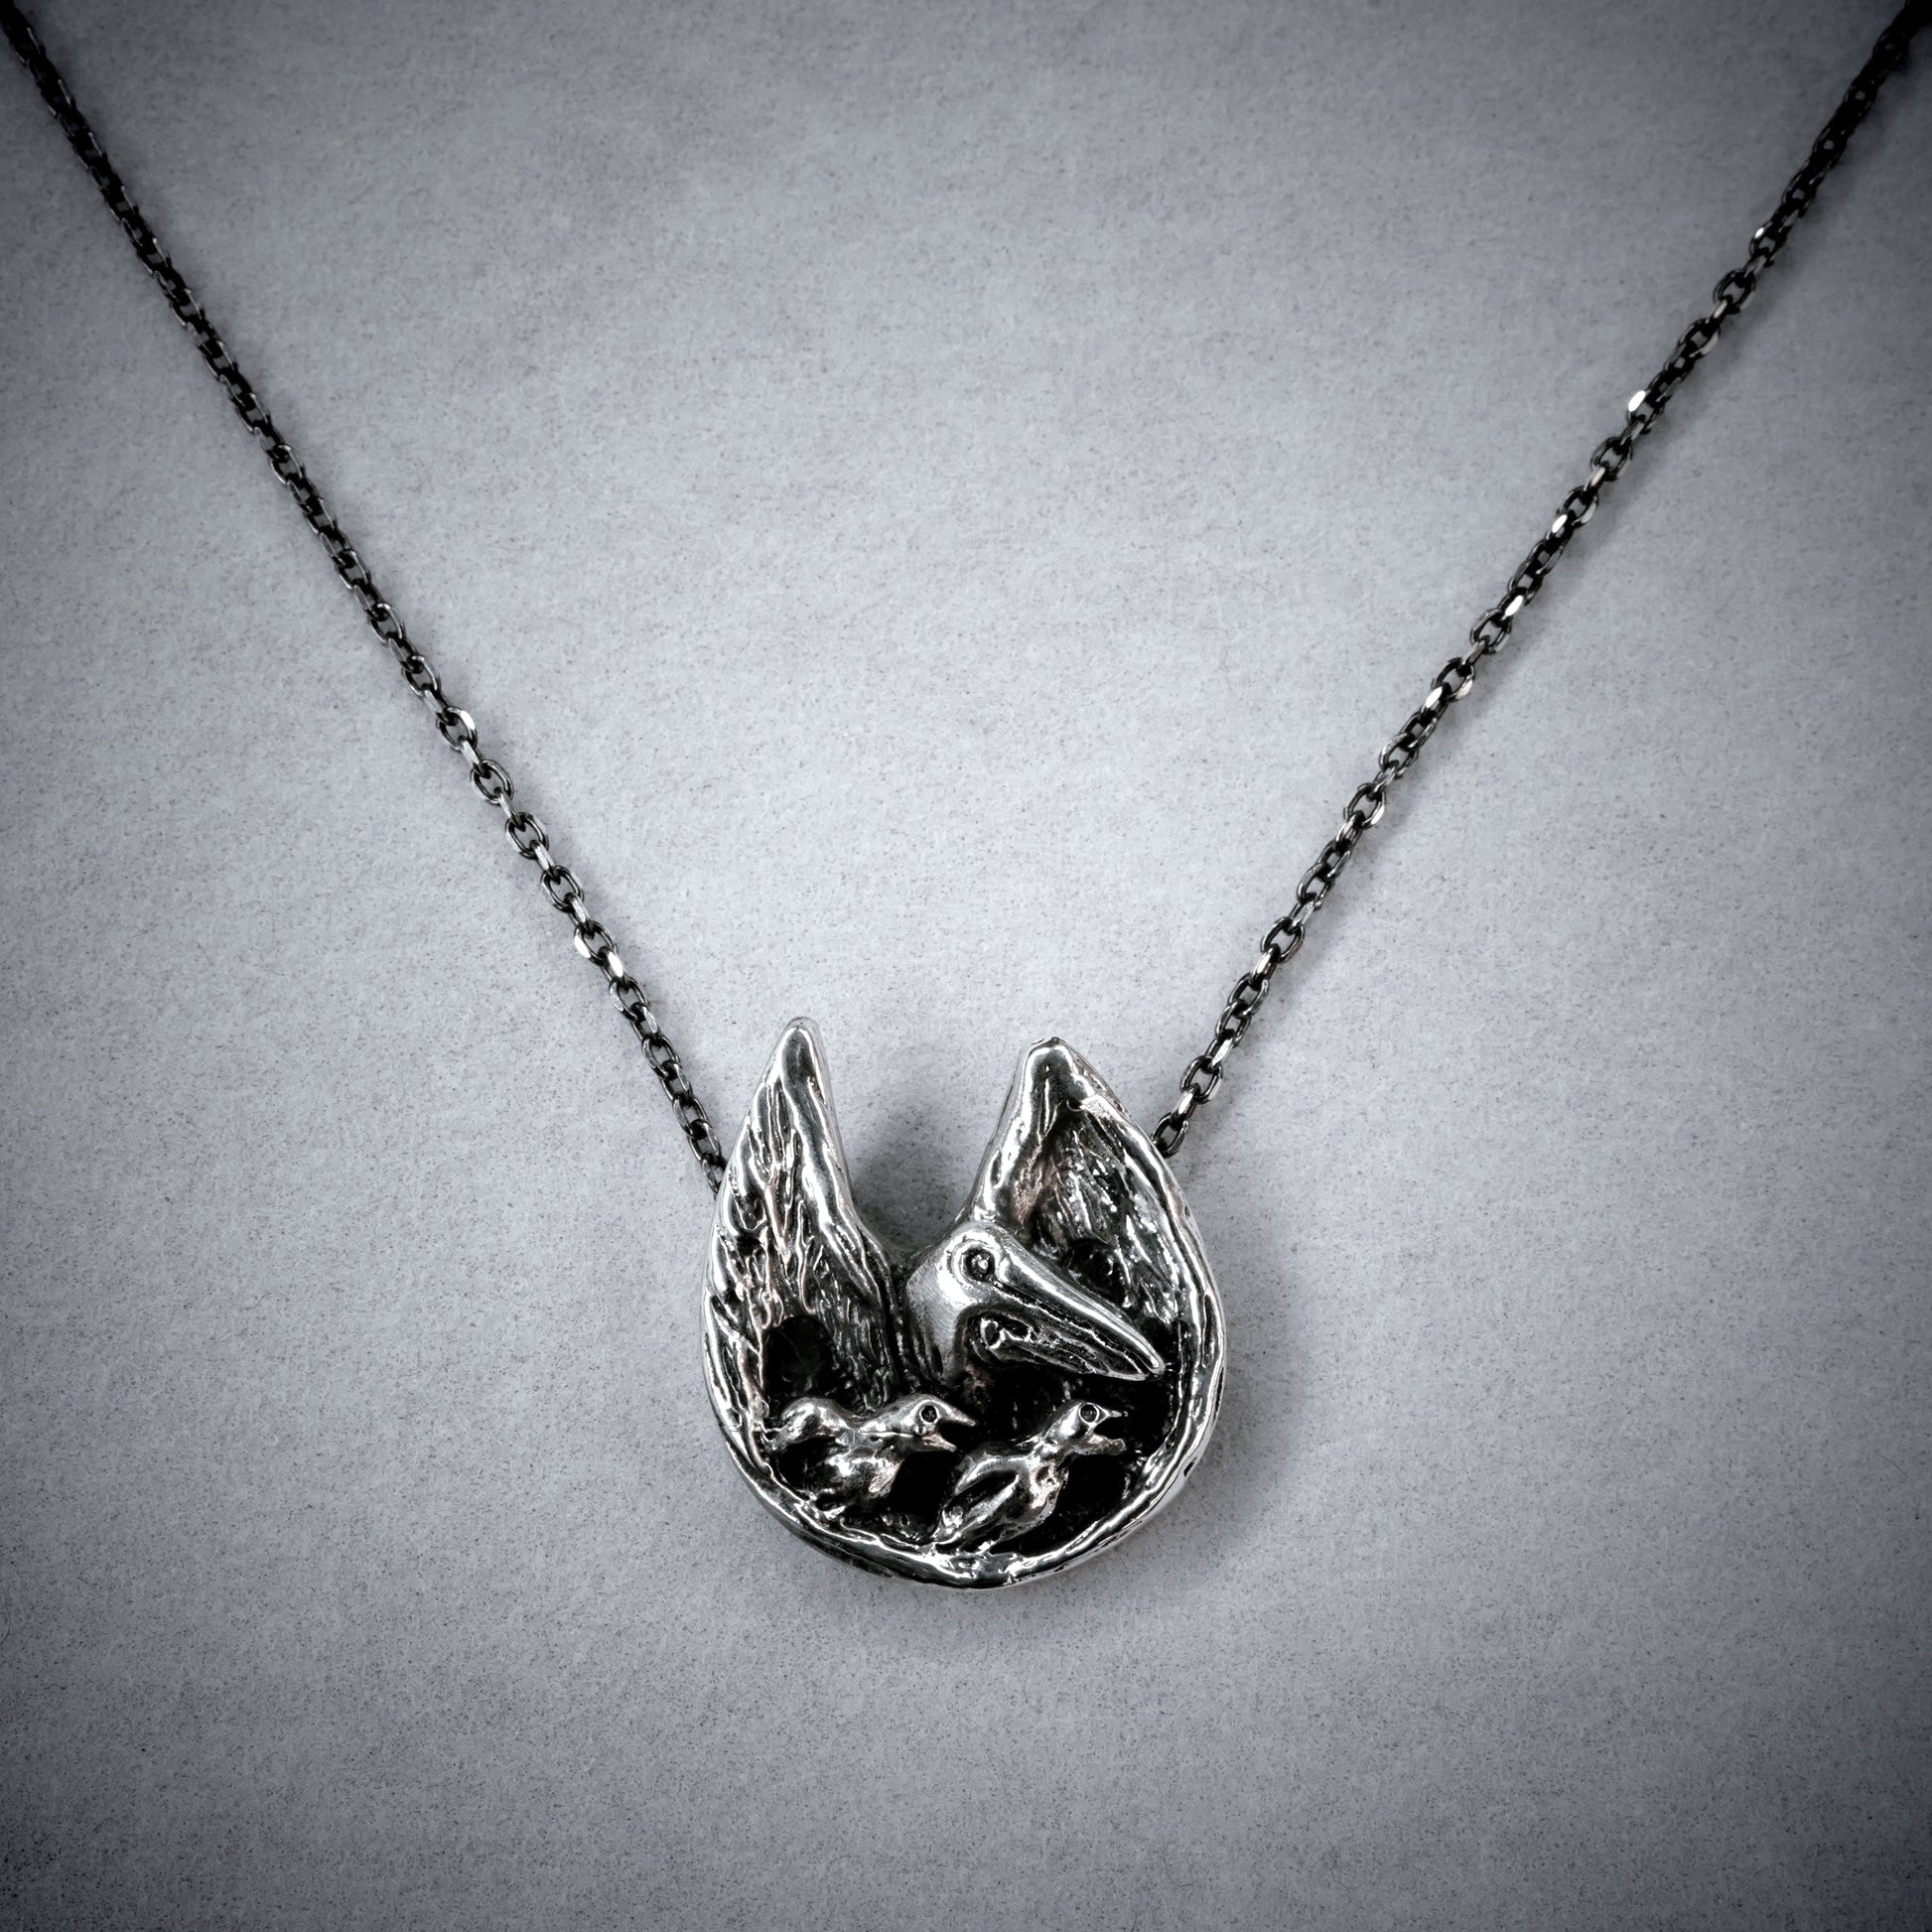 Sterling silver Louisiana necklace